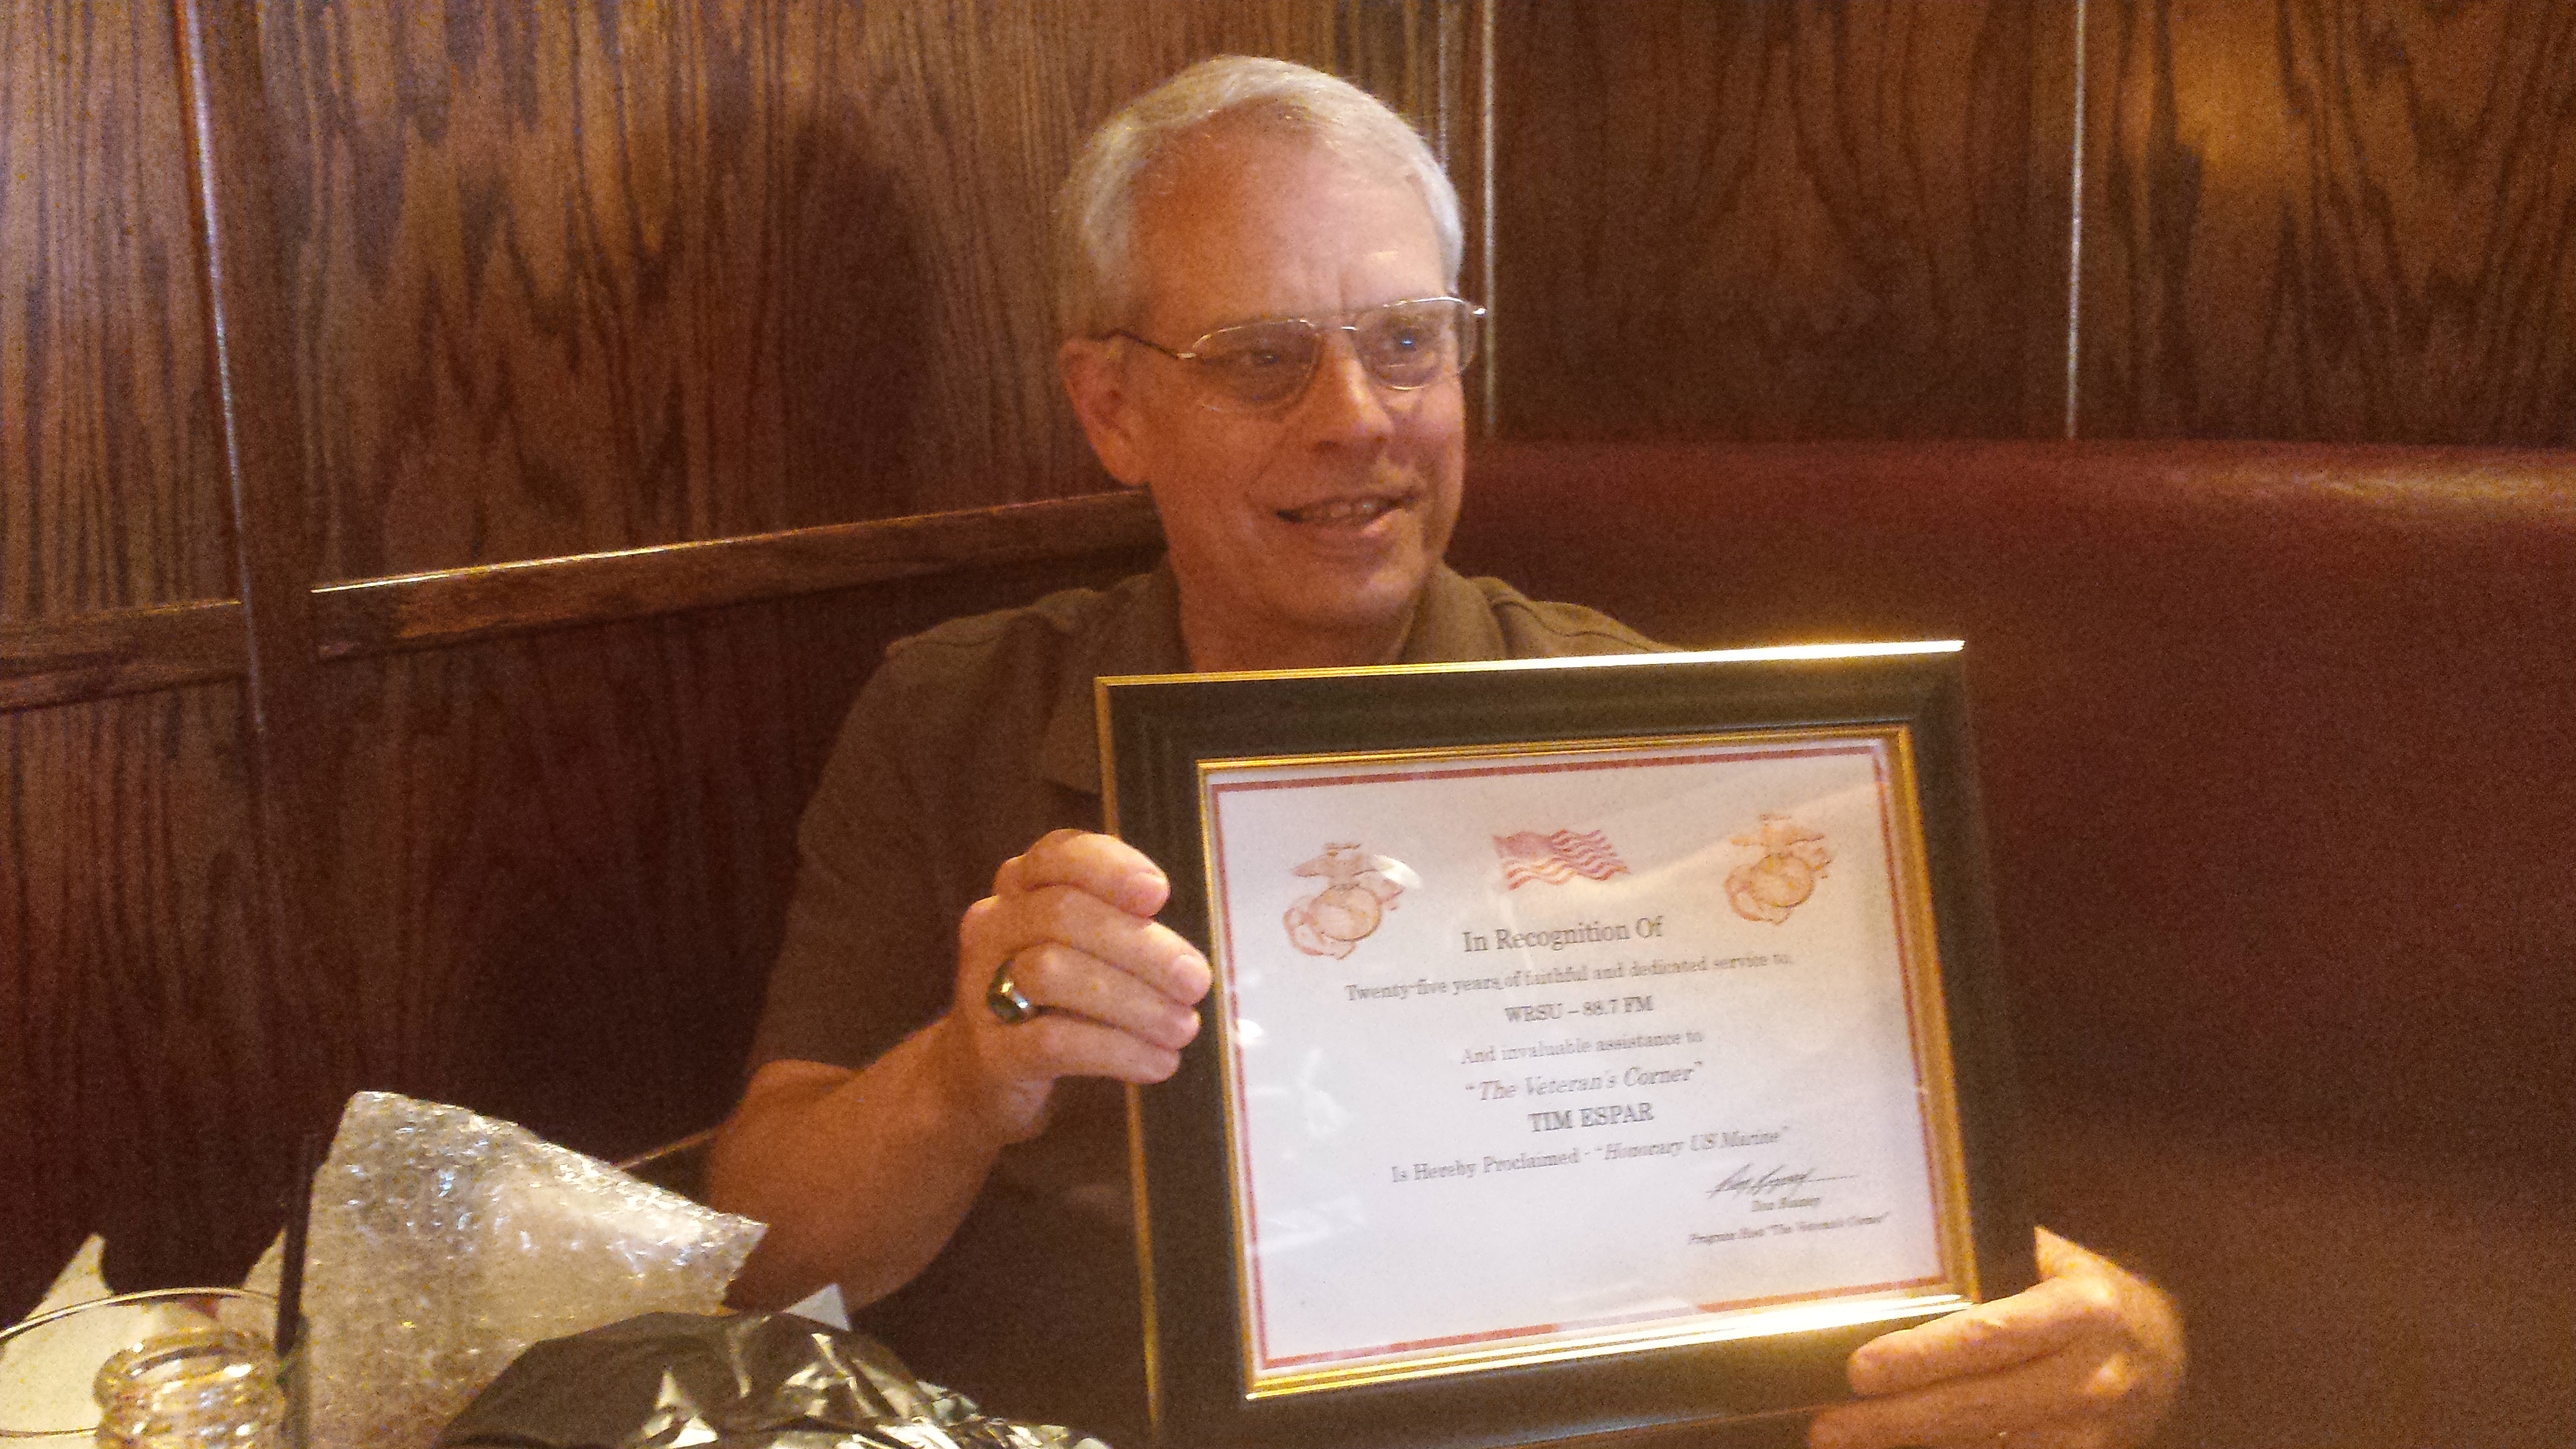 2014 - Former Broadcast Administrator Tim Espar recieving a plaque at a luncheon for 25 year of service to WRSU